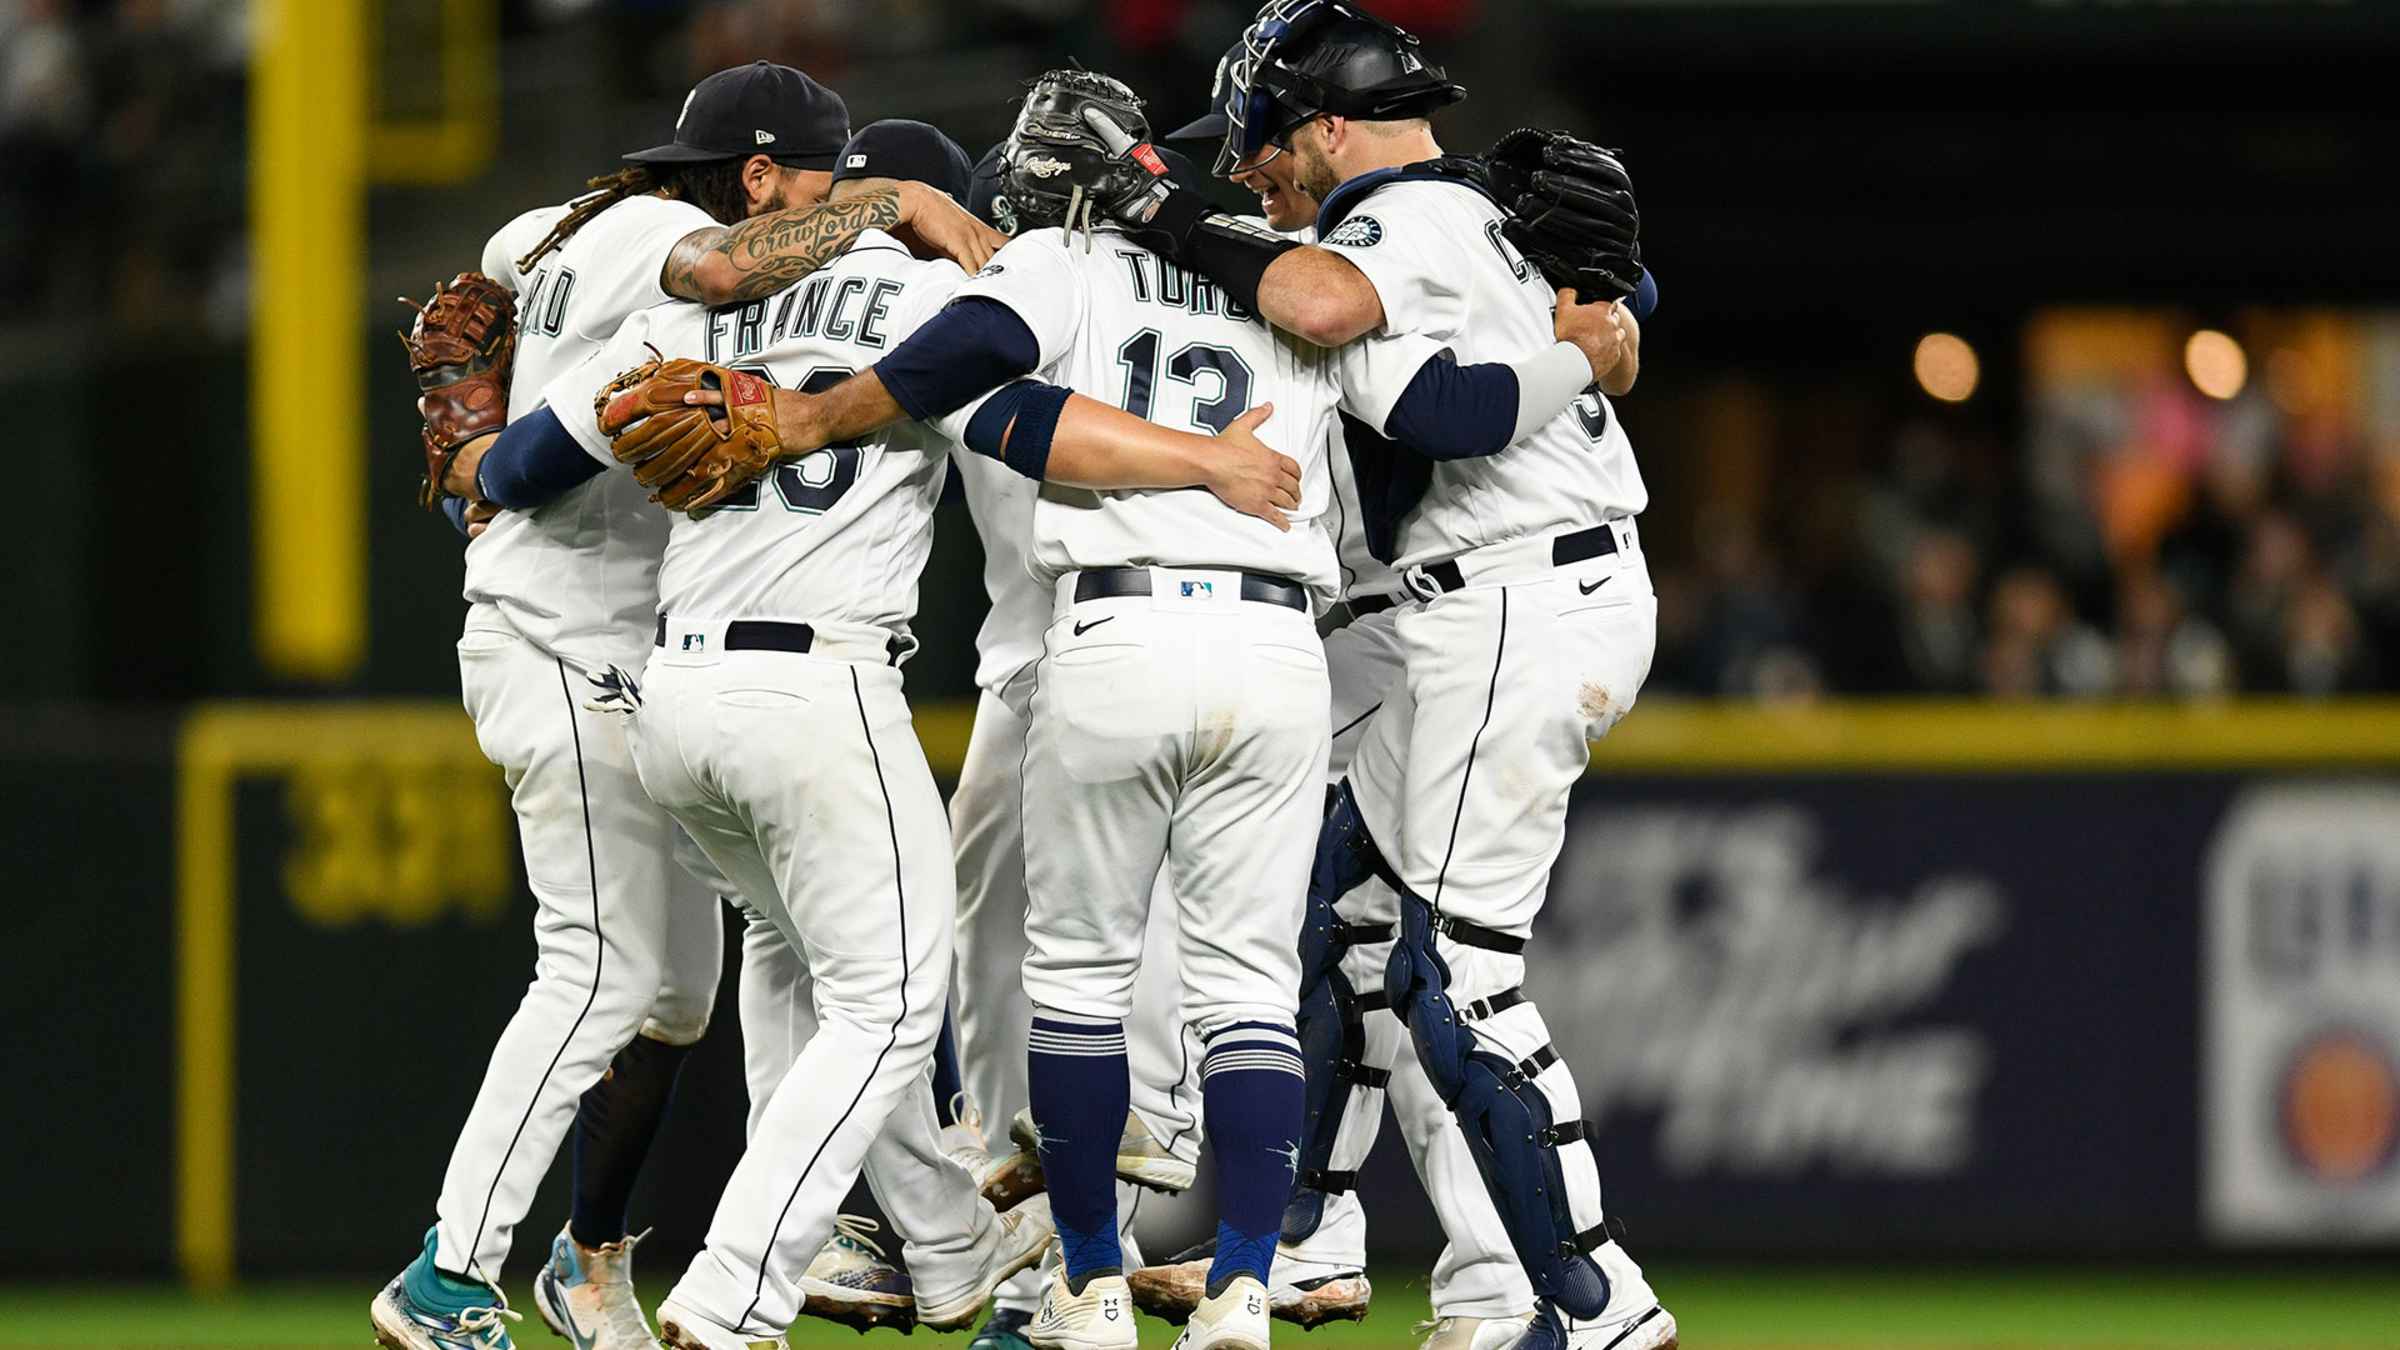 With the Mariners in the playoffs, Seattle nonprofits win too